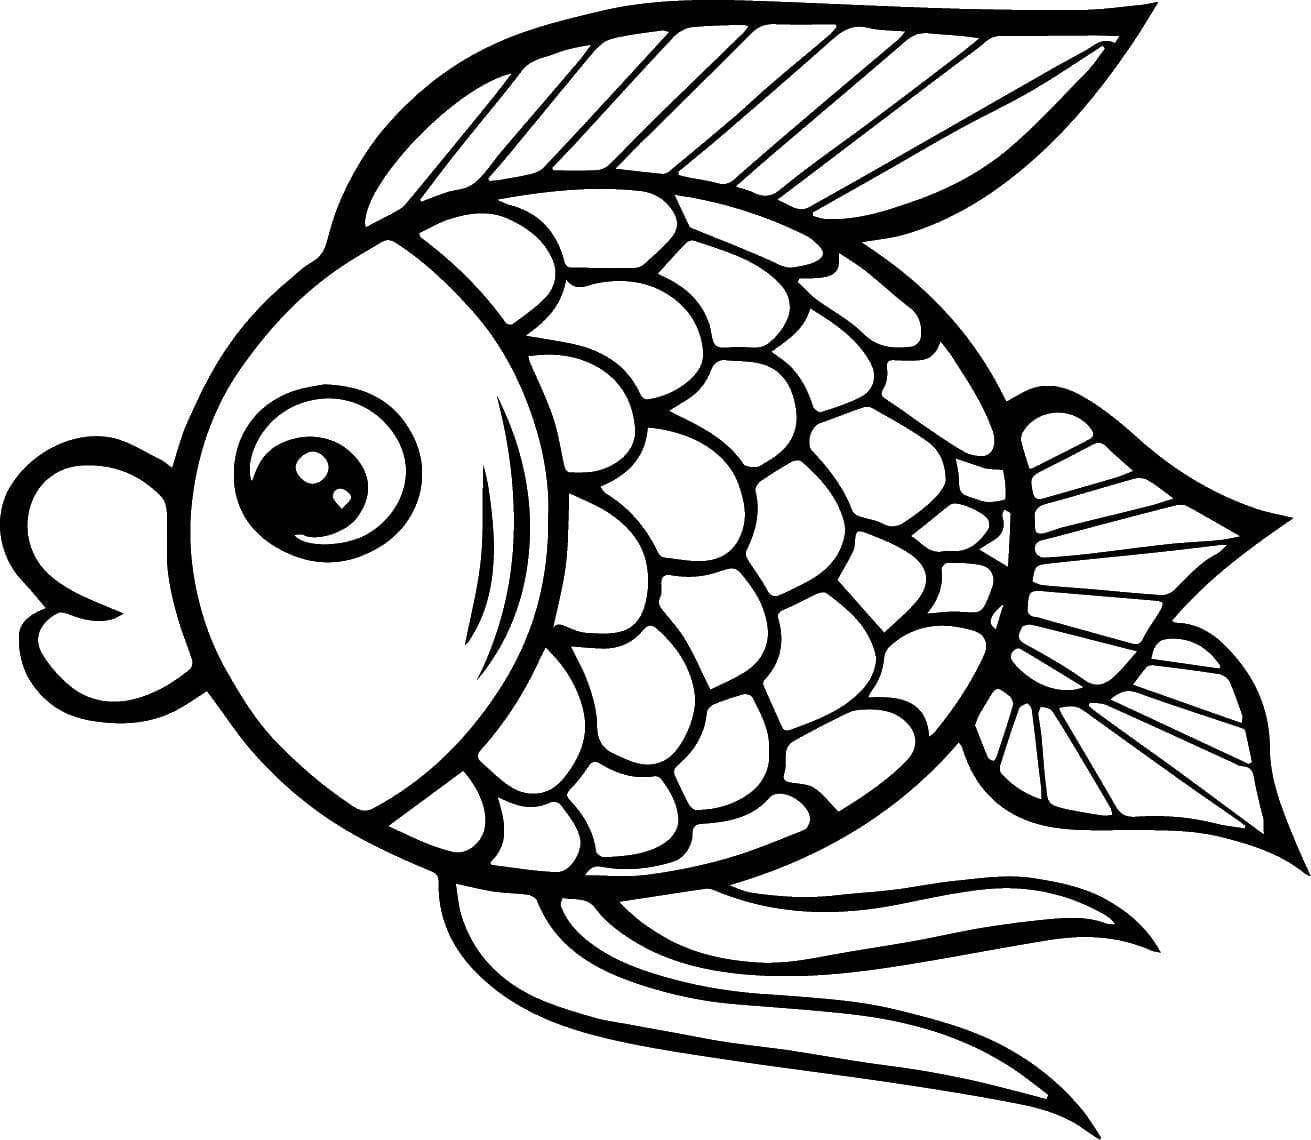 Goldfish coloring pages | 40 Printable coloring pages